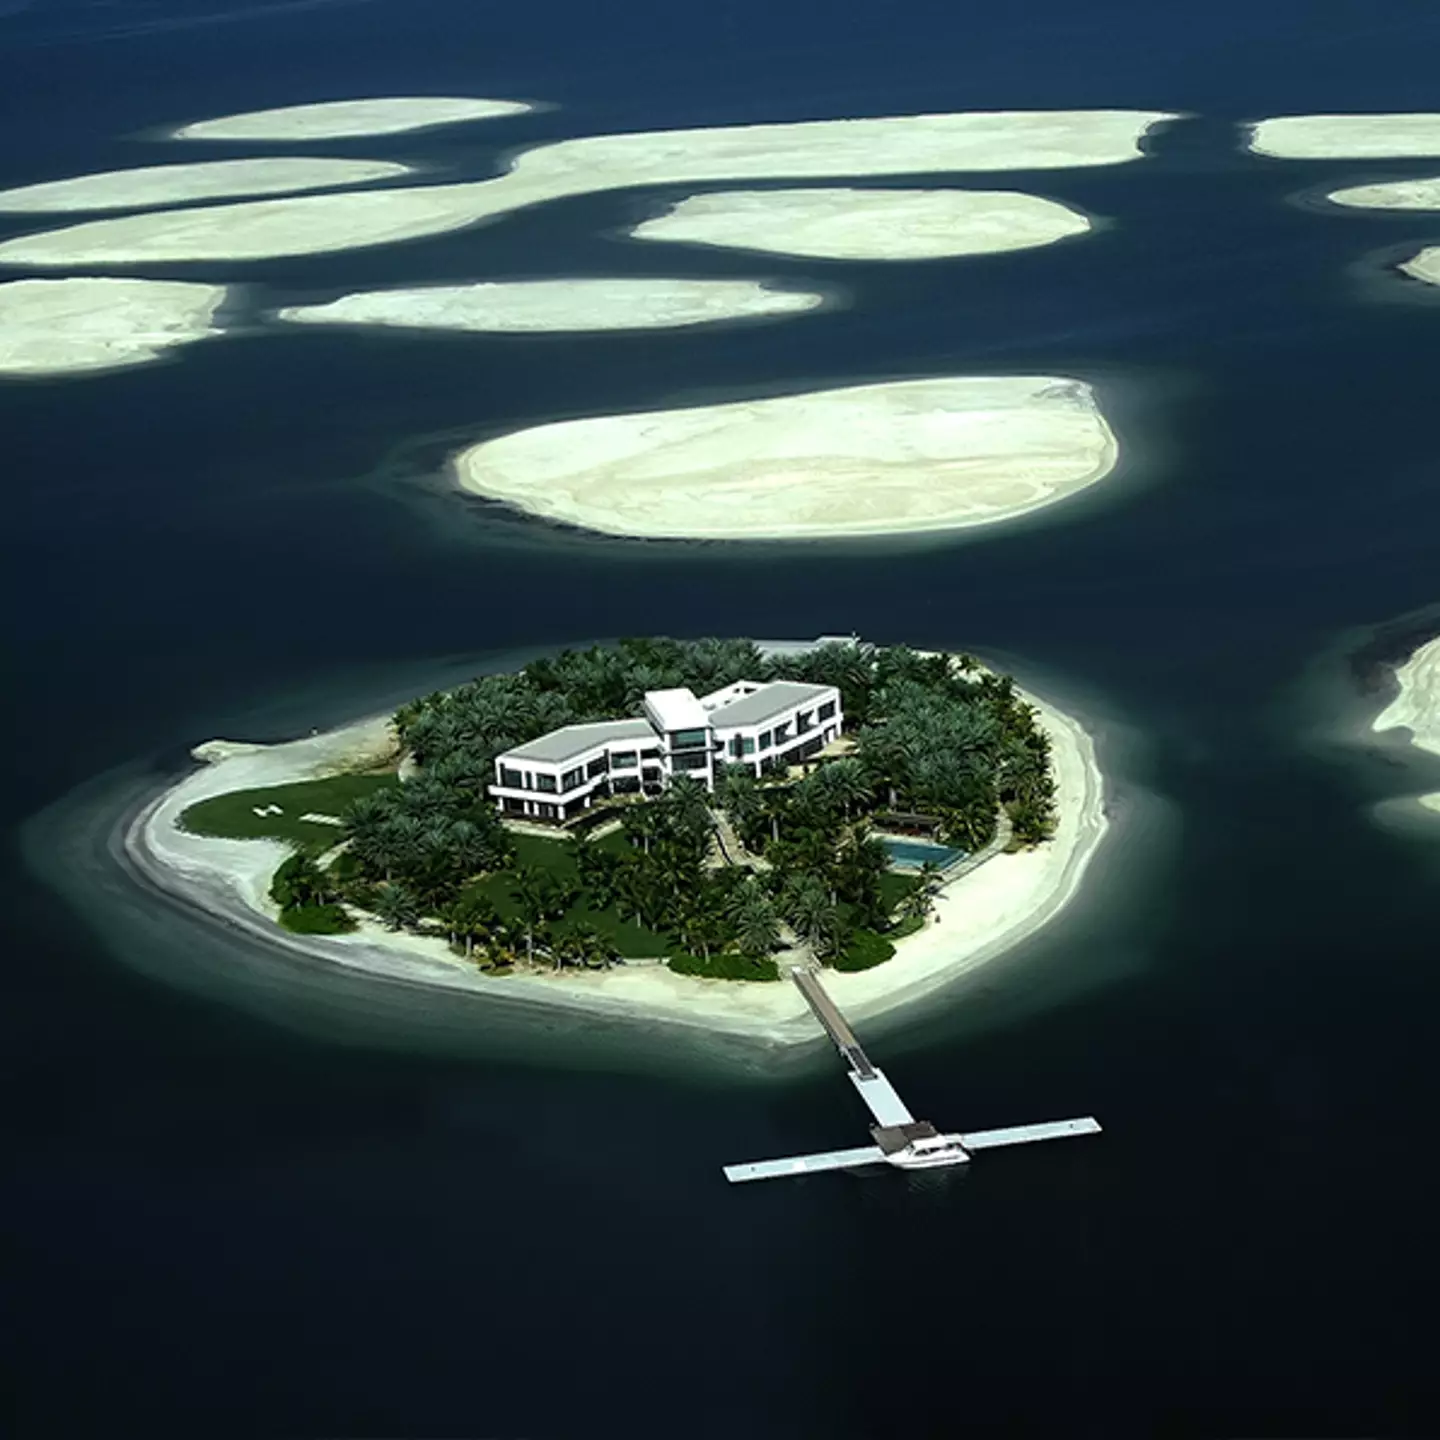 Dubai’s 300 eerie manmade islands built for the super rich remain mostly empty